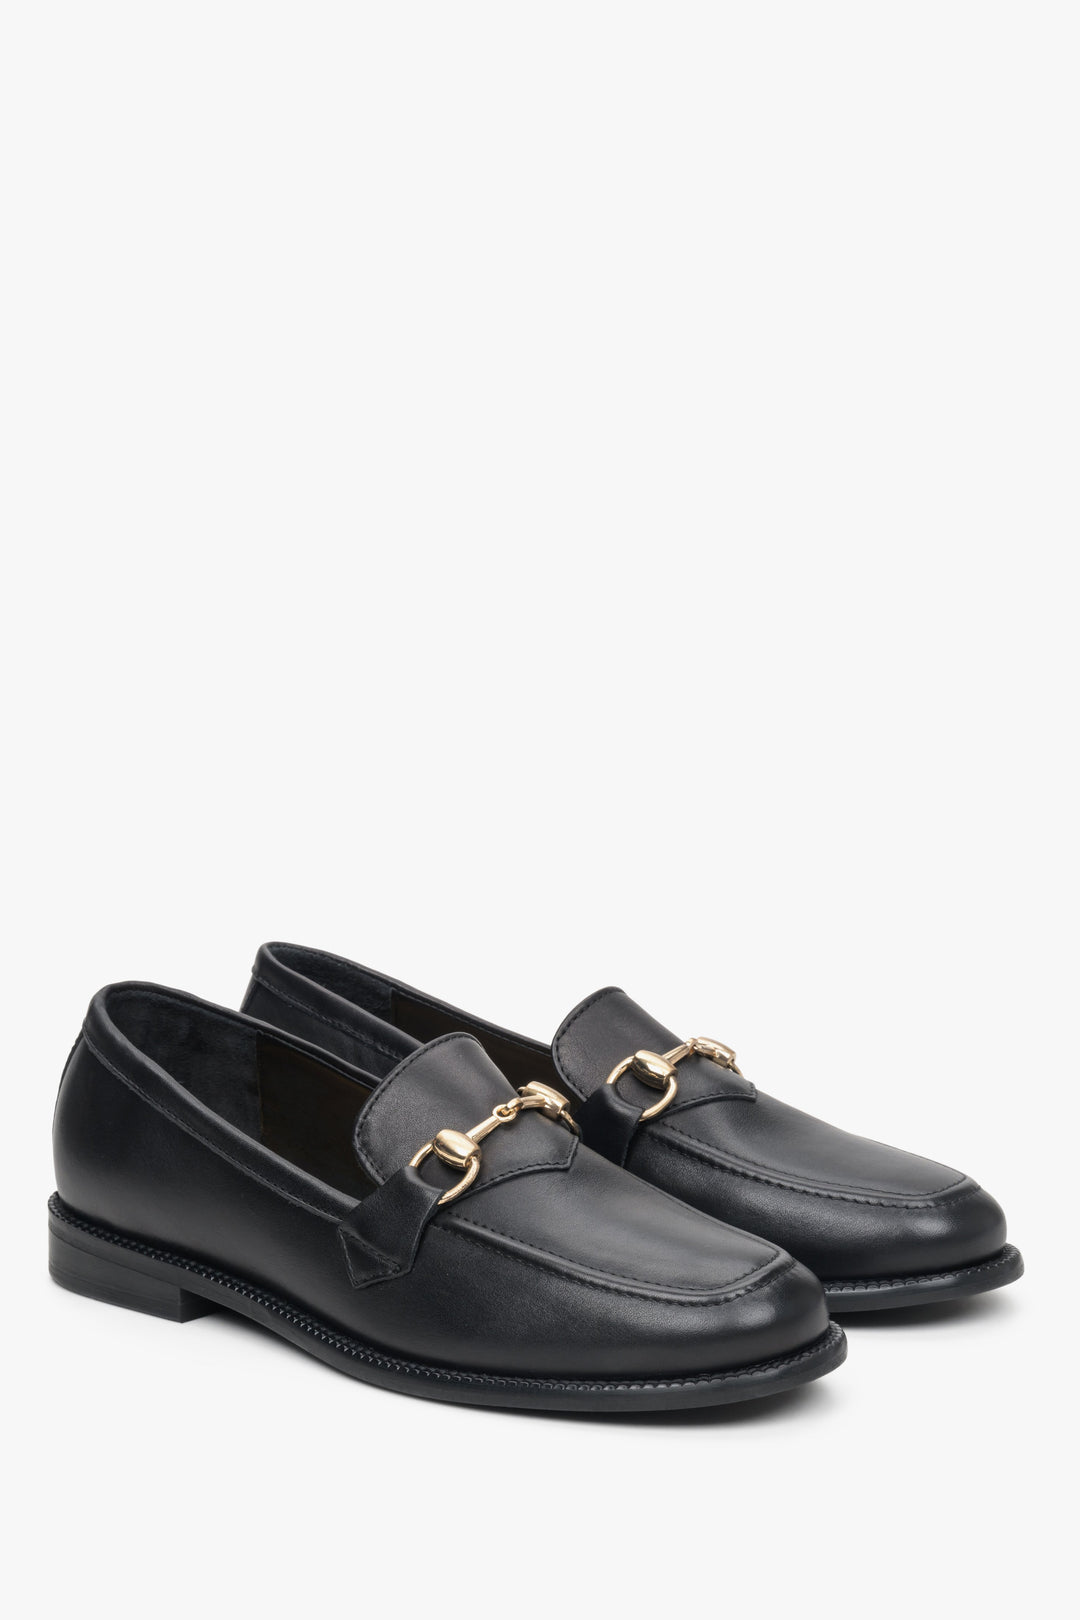 Elegant Women's Black Italian Leather Loafers with Gold Buckle by Estro.